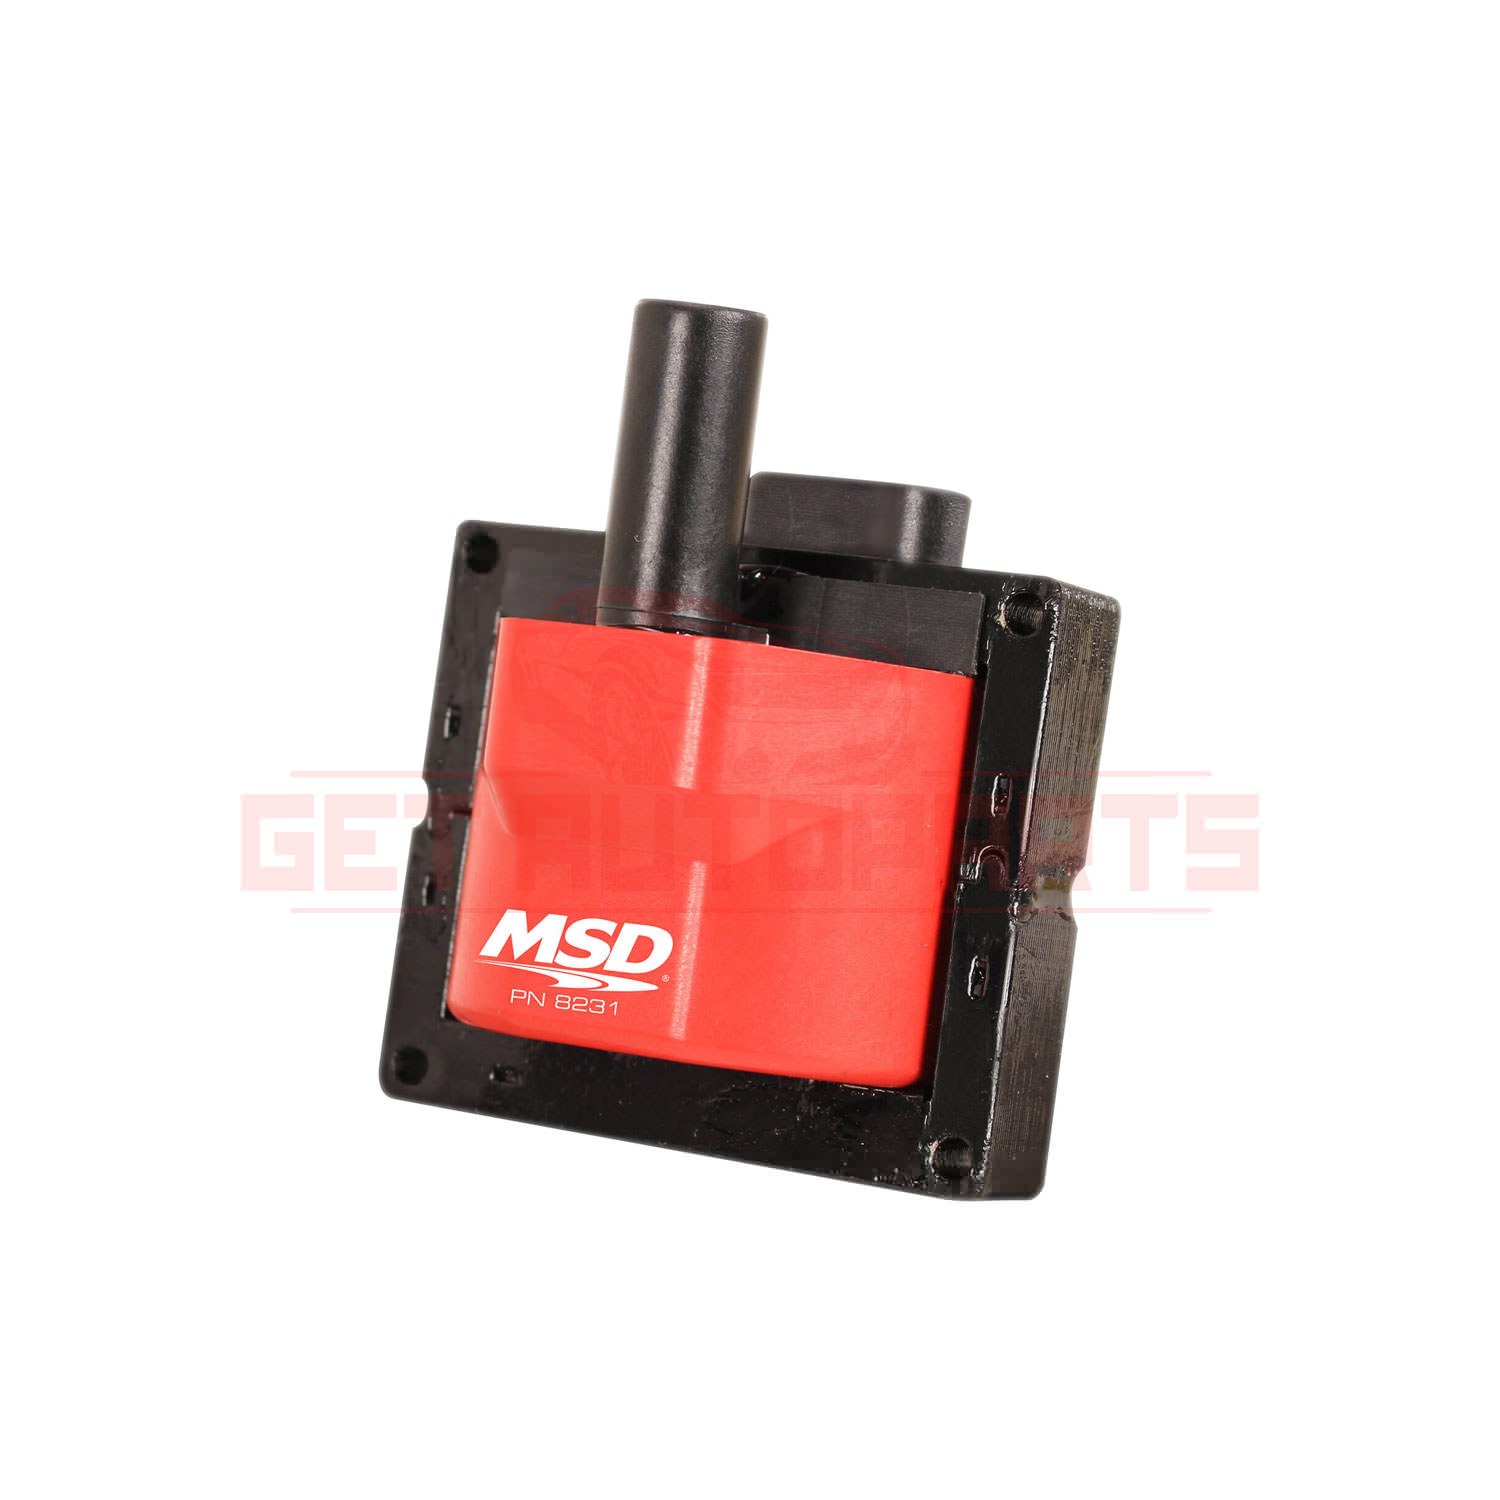 MSD Ignition Coil for GMC K1500 Suburban 1996-1997